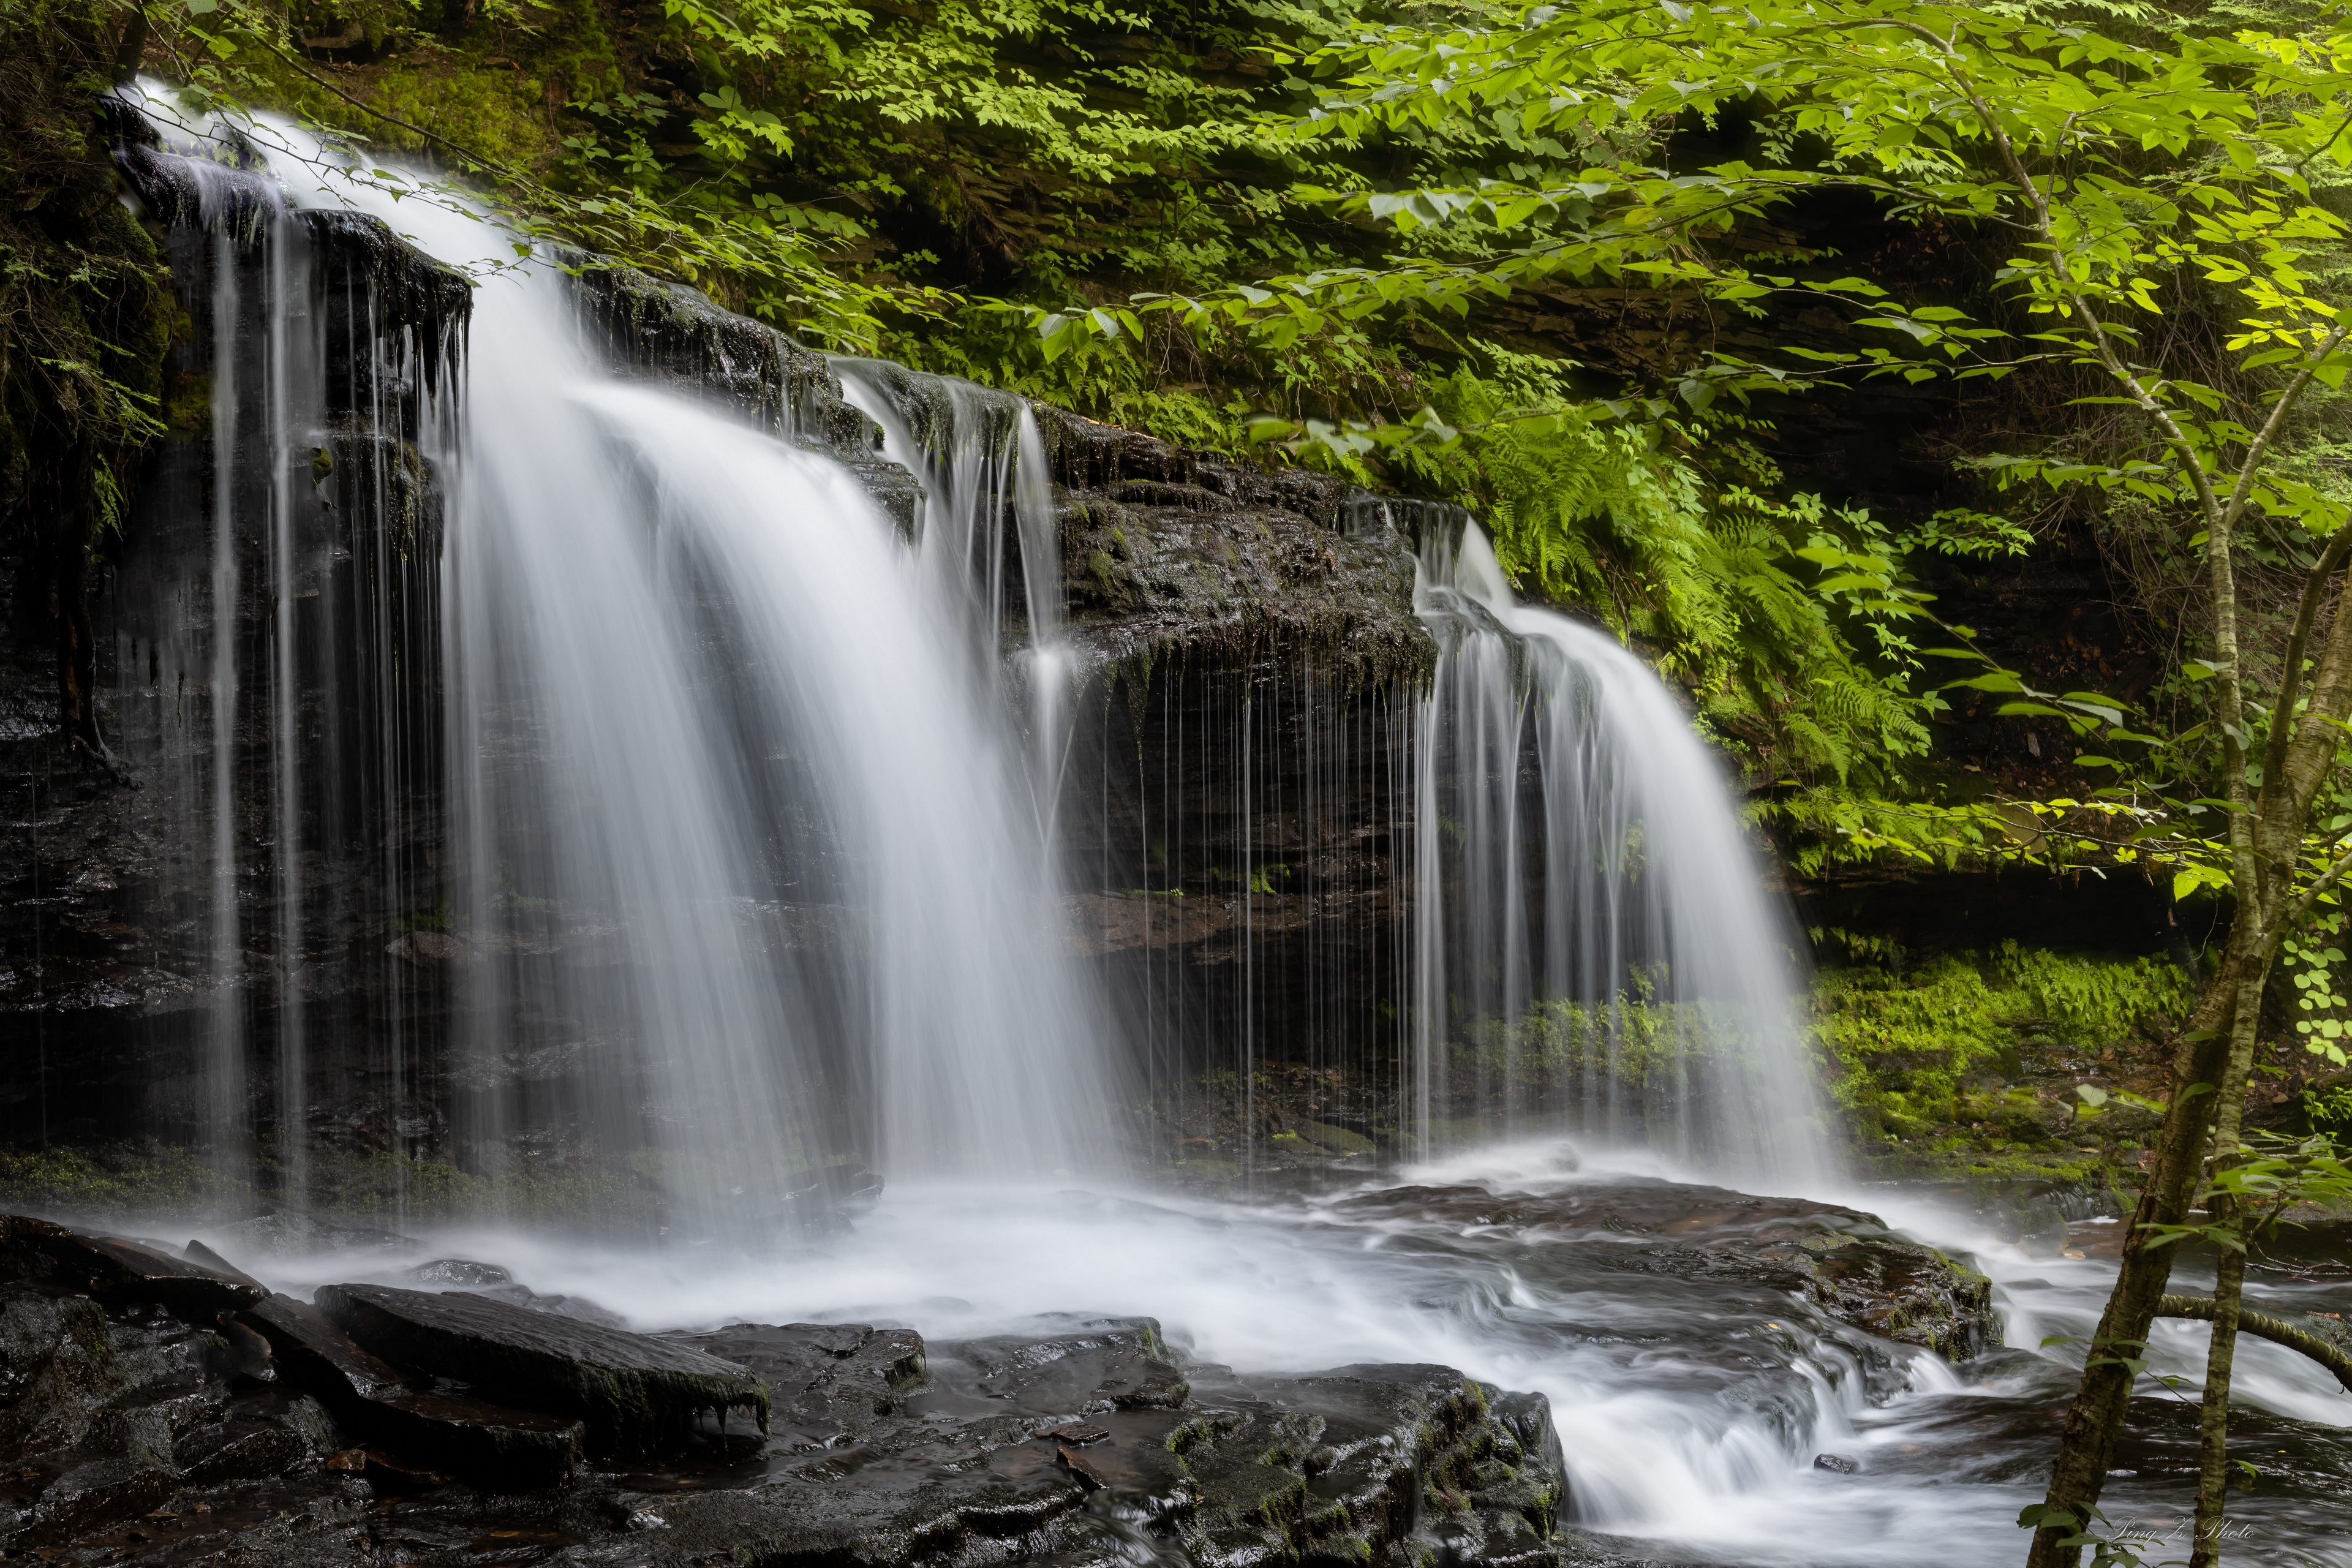 General 3840x2560 Ricketts Glen State Park USA Pennsylvania nature waterfall forest rocks water